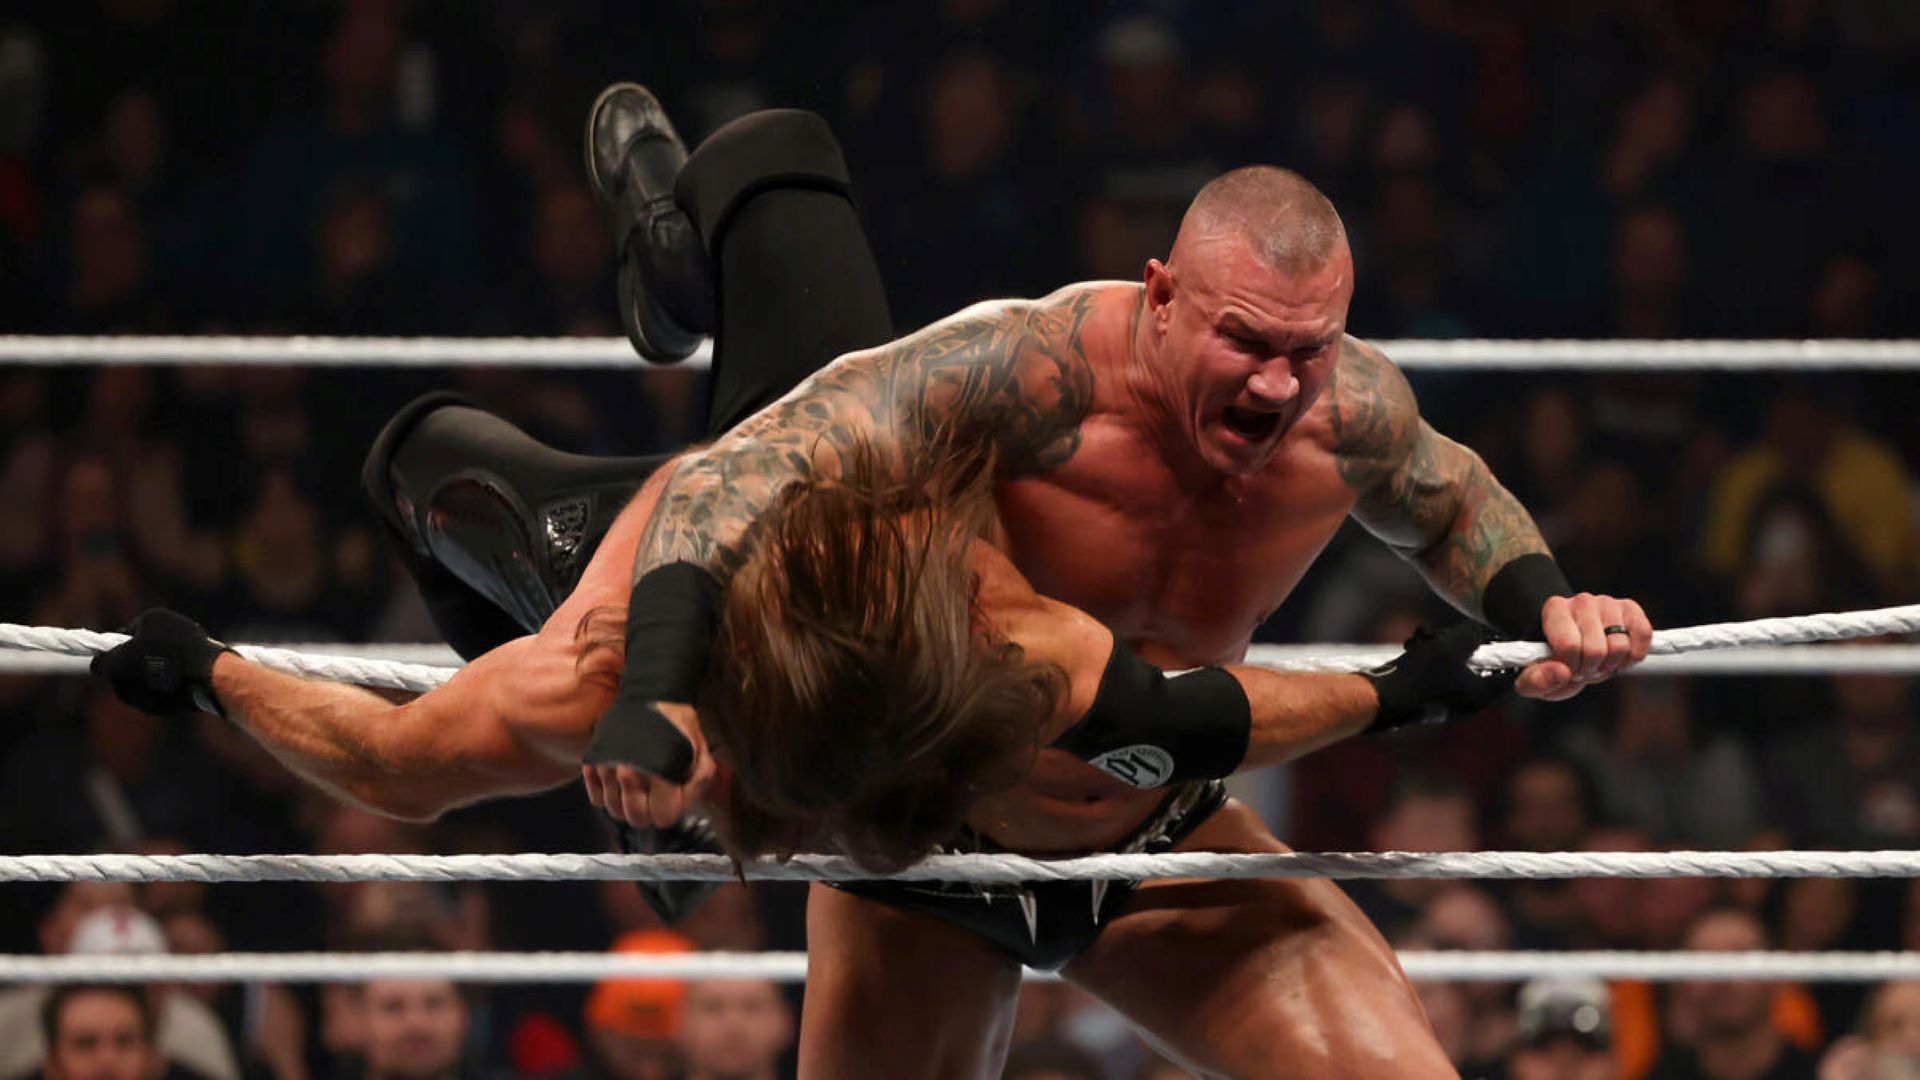 Randy Orton beat AJ Styles in the opening round of the King of the Ring tournament.